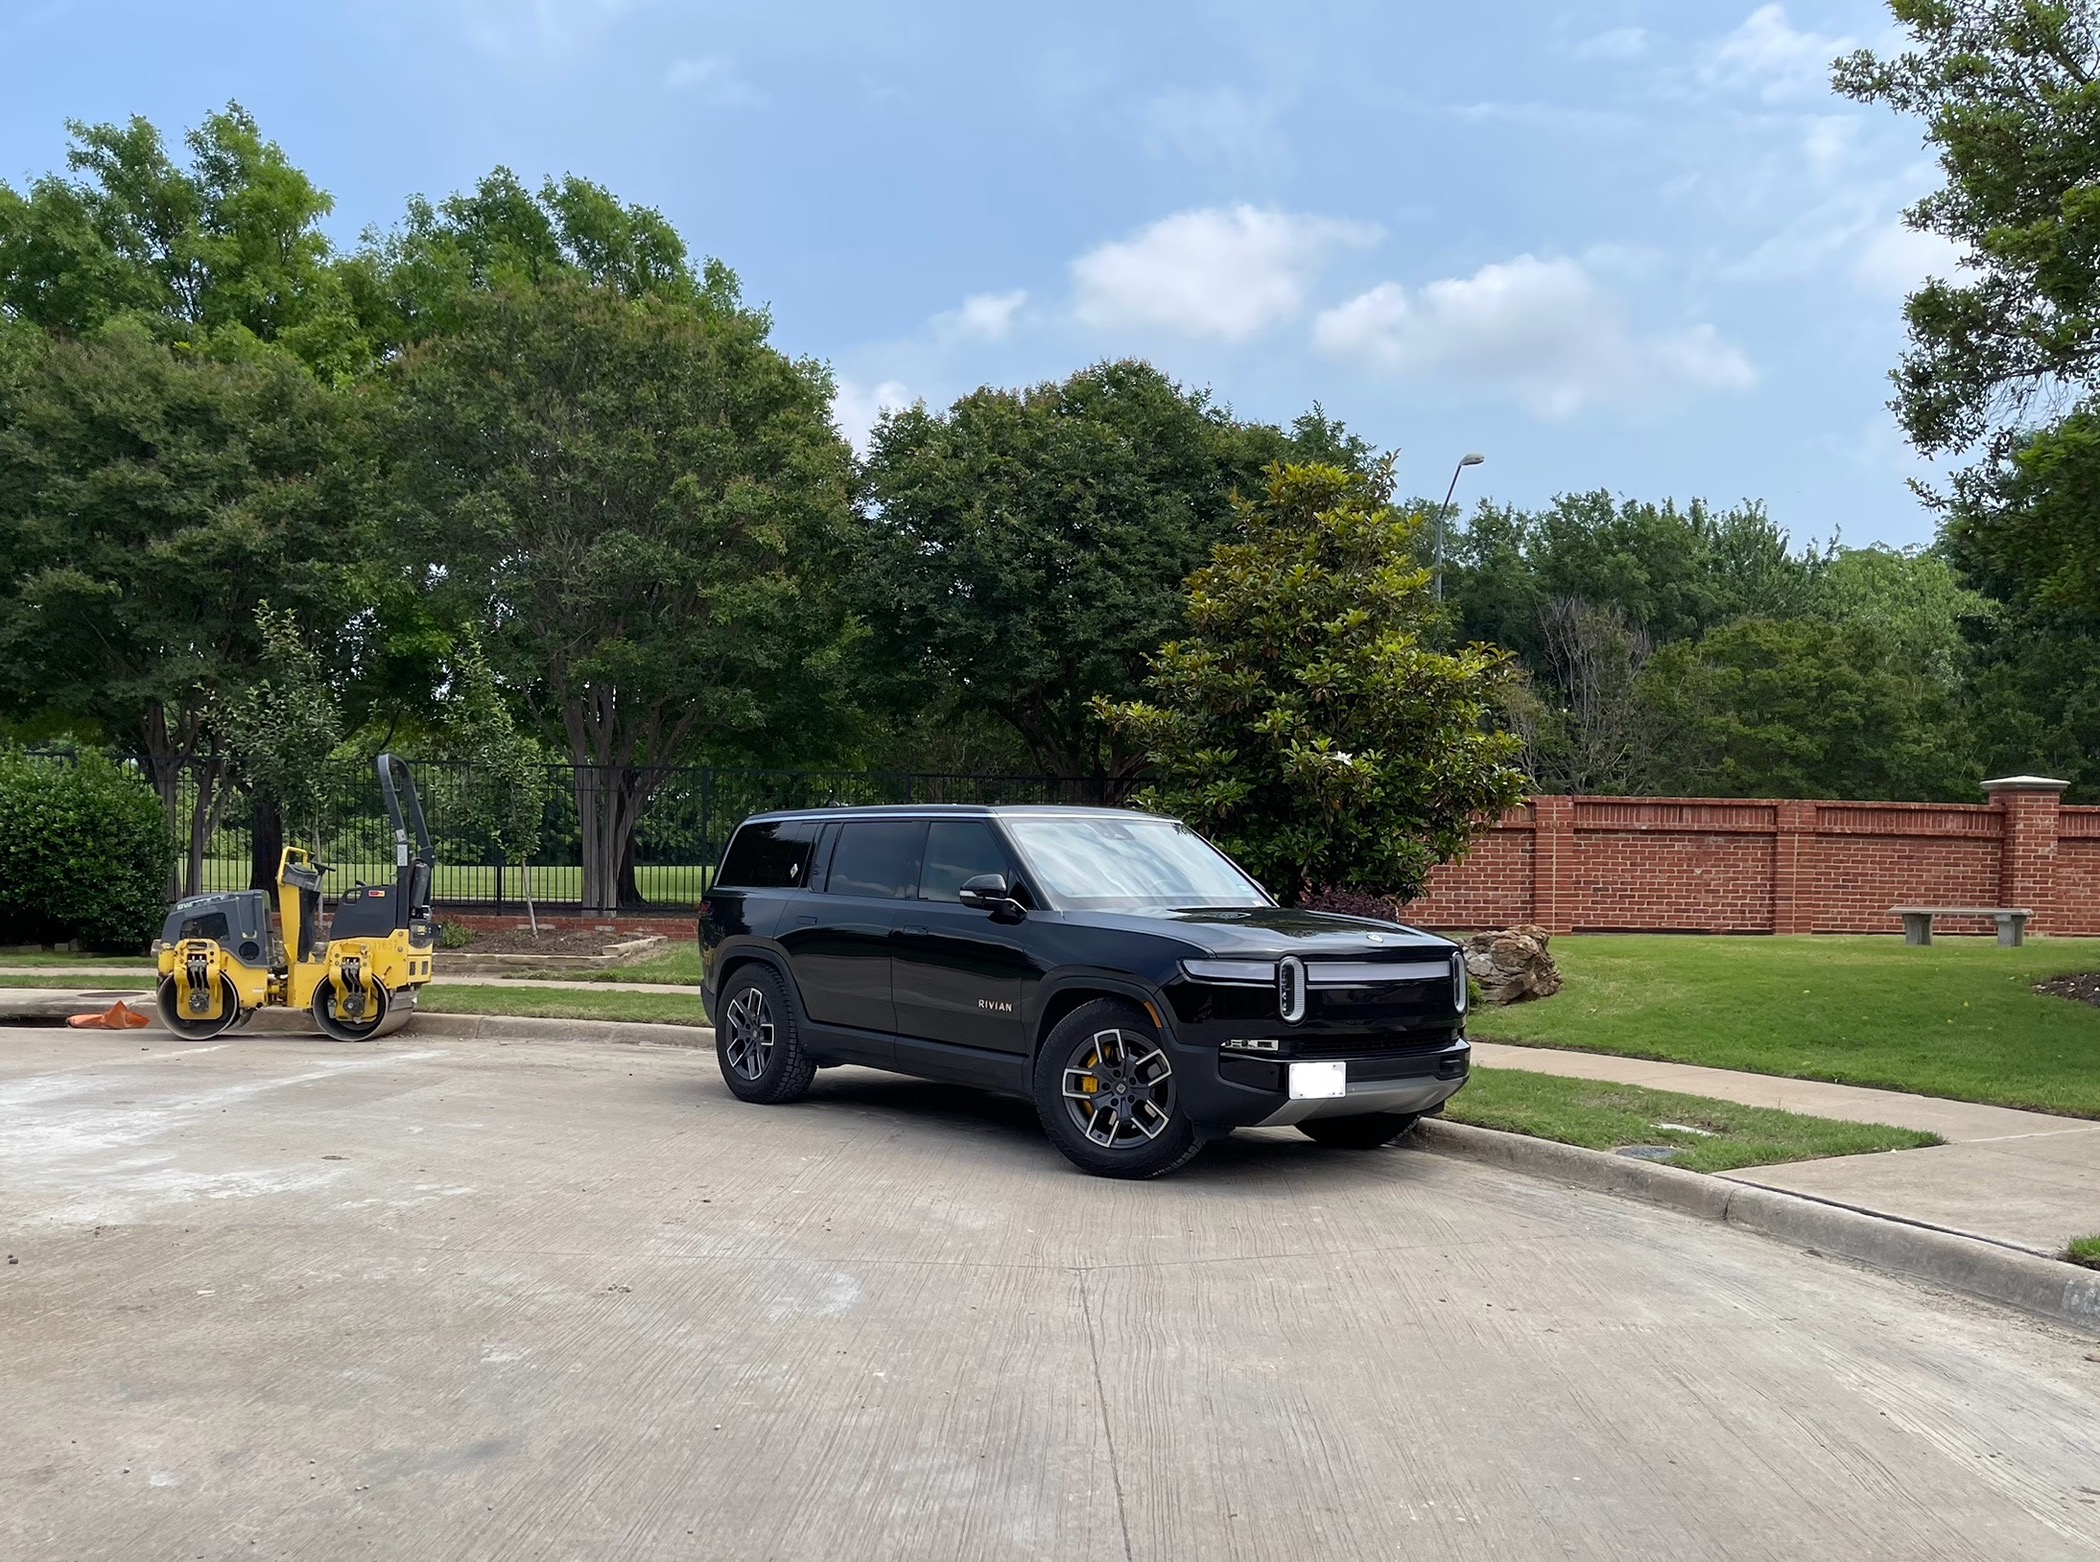 Rivian R1T R1S Random Rivian Photos of the Day - Post Yours! 📸 🤳 IMG_0324